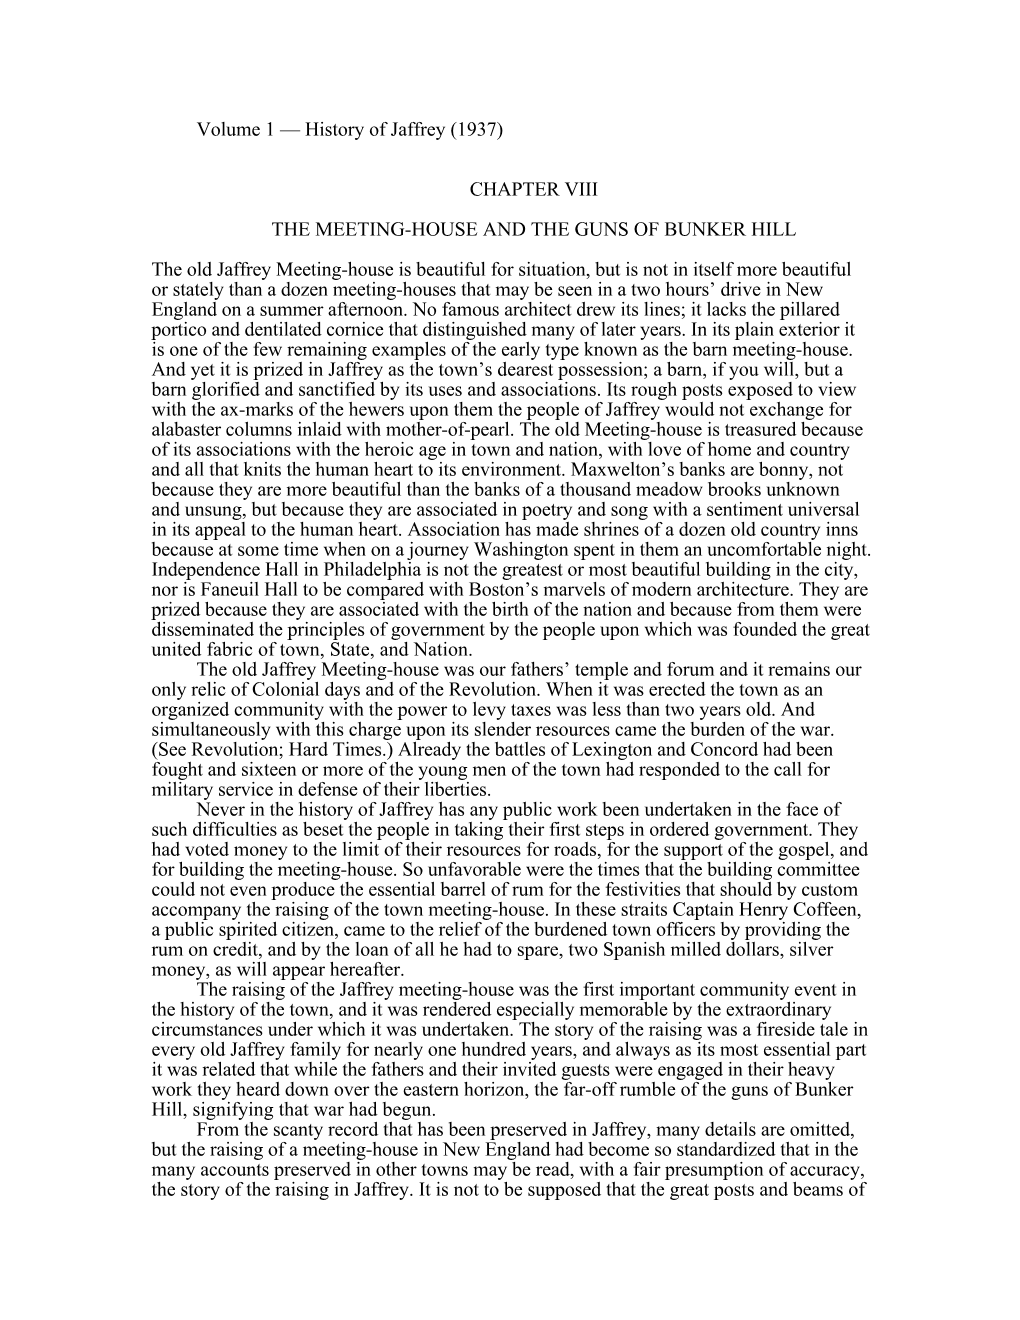 Chapter Viii the Meeting-House and the Guns